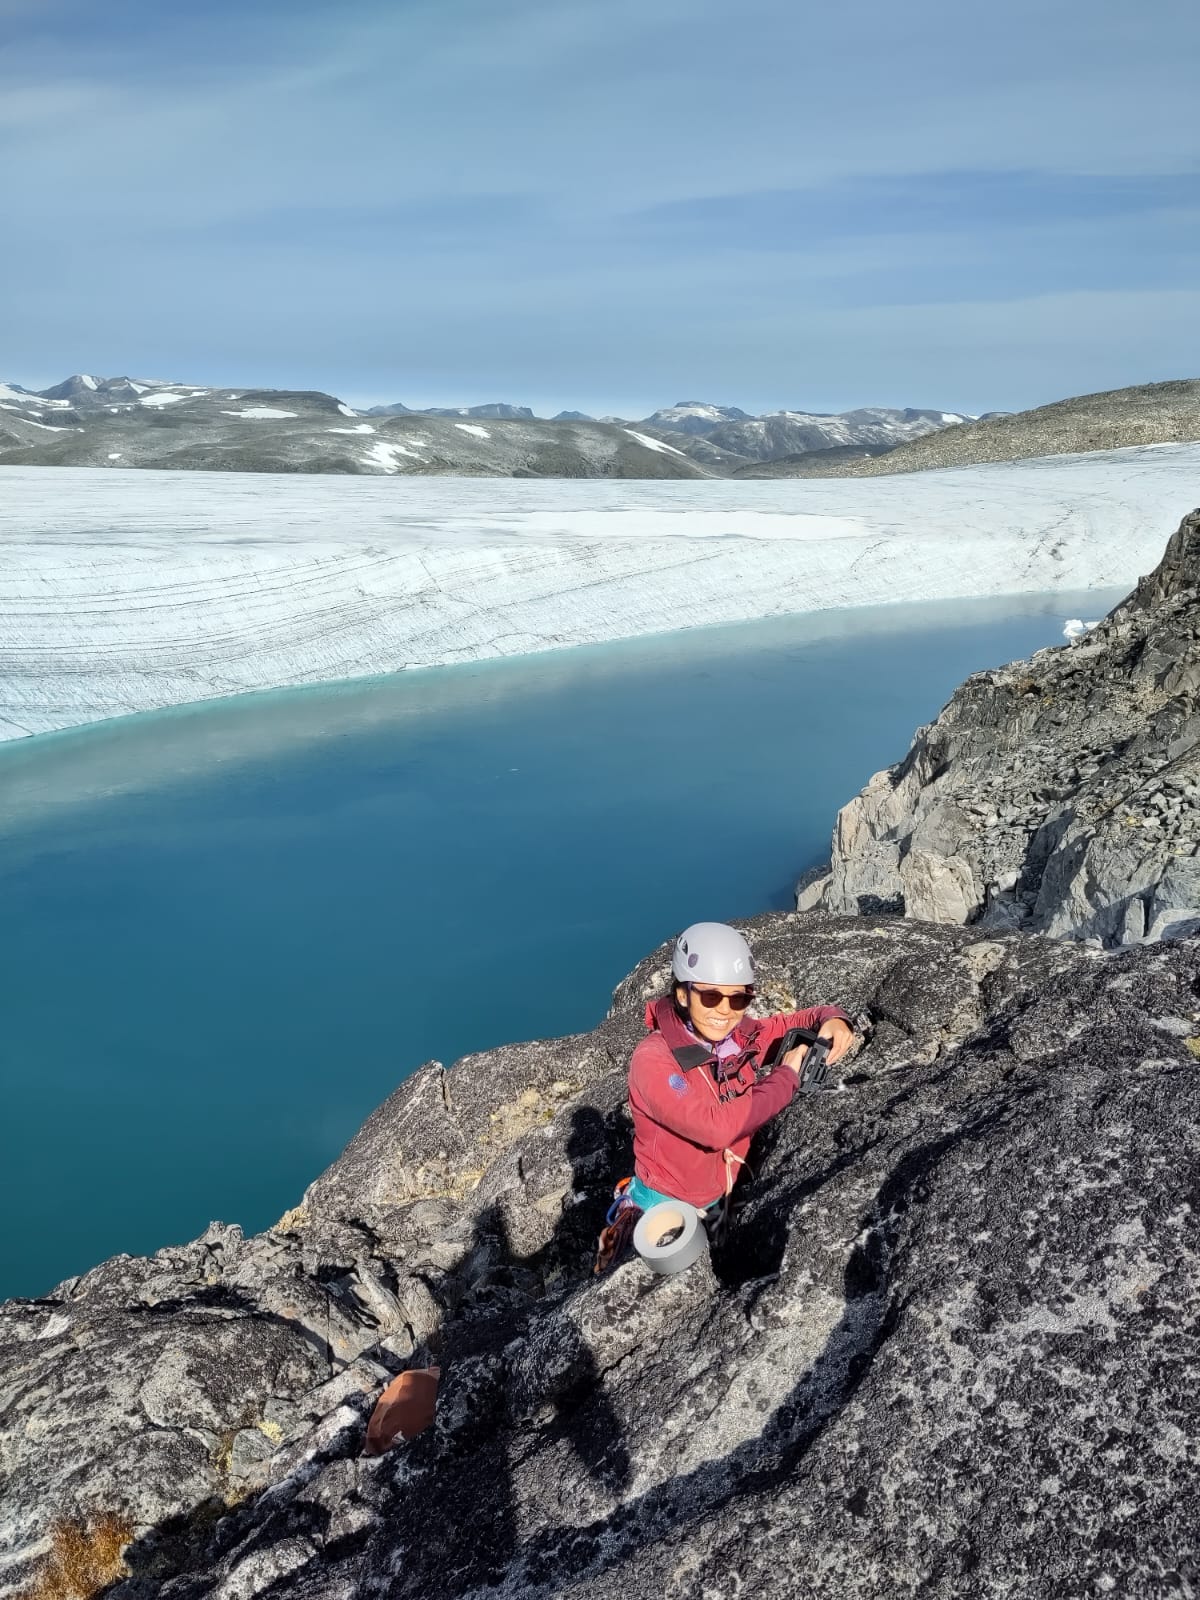 A group of researchers wants to help communities living close to melting glaciers. Photo shows a female scientist mounting equipment.